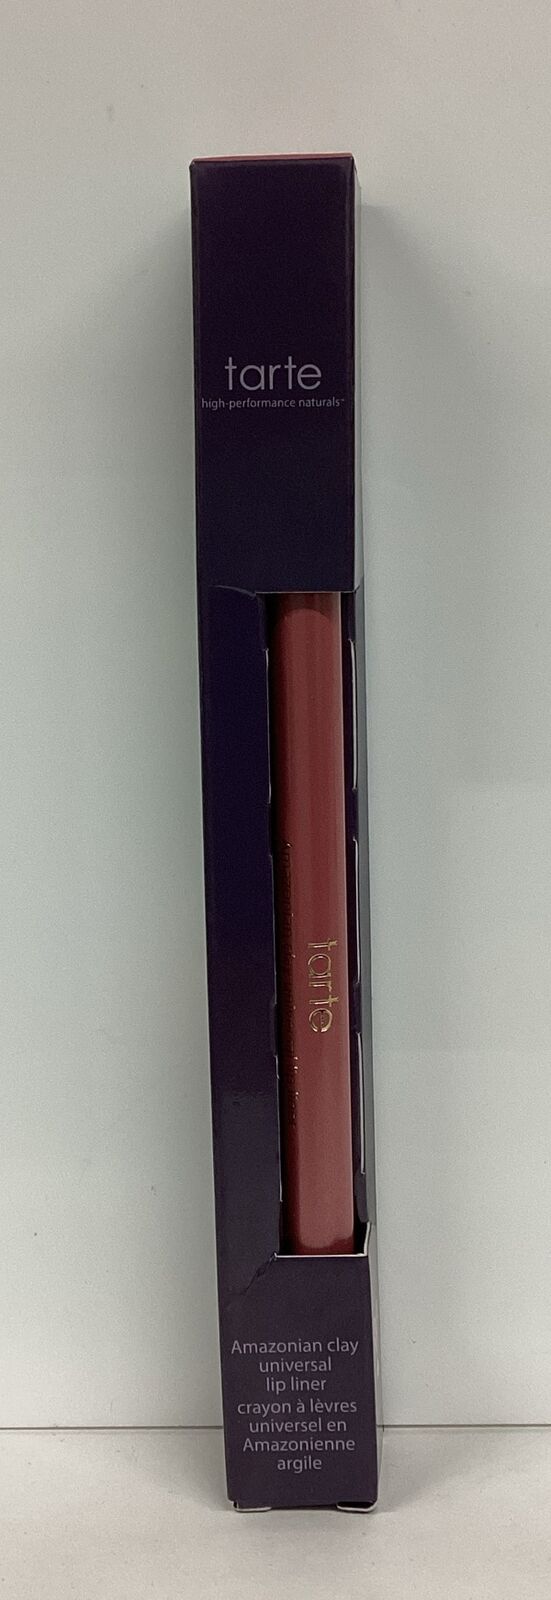 Tarte Amazonian Clay Universal Lip Liner NUDE new As Pictured